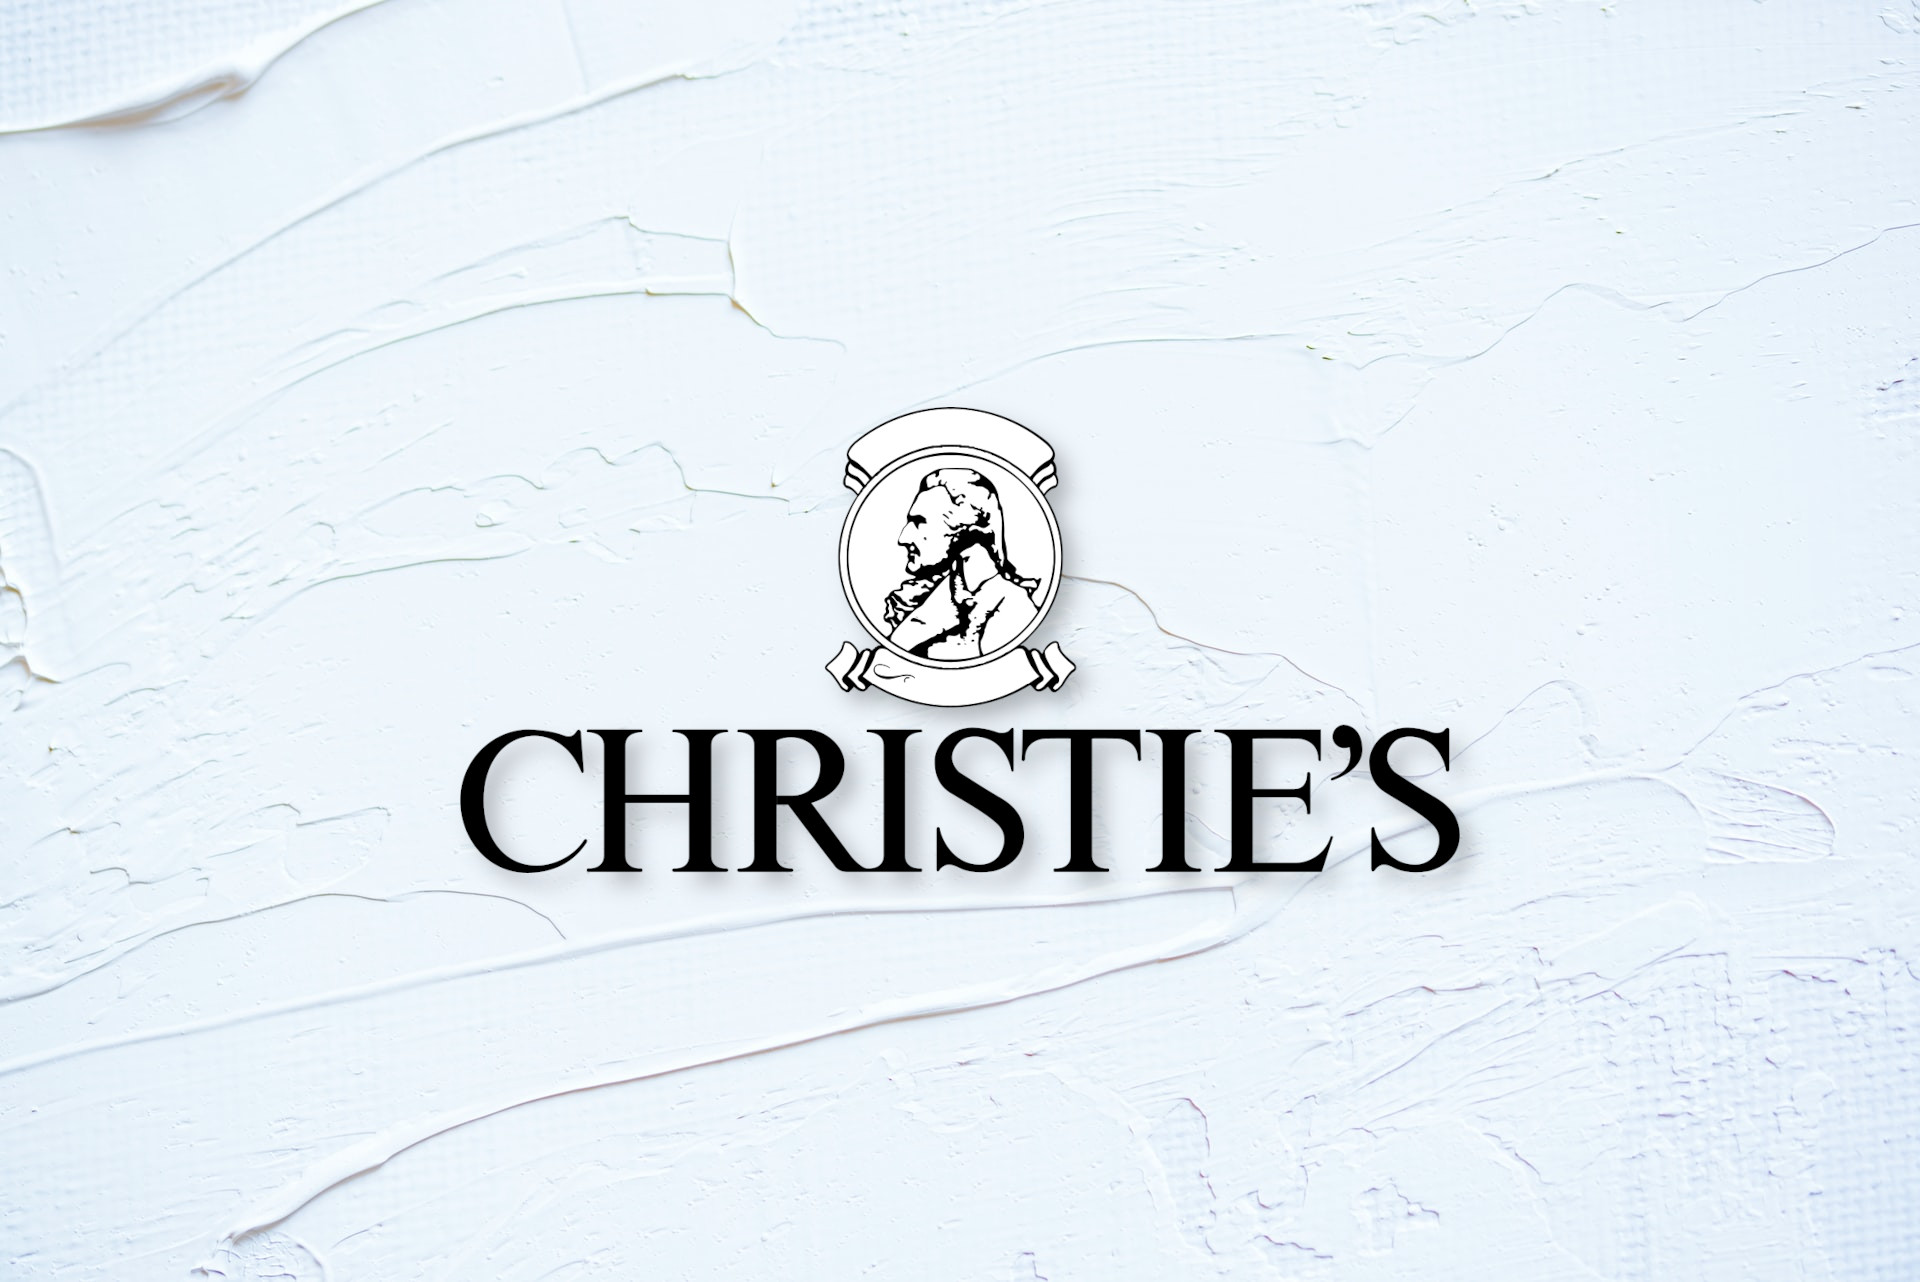 Christie's art and luxurty auction house image cover